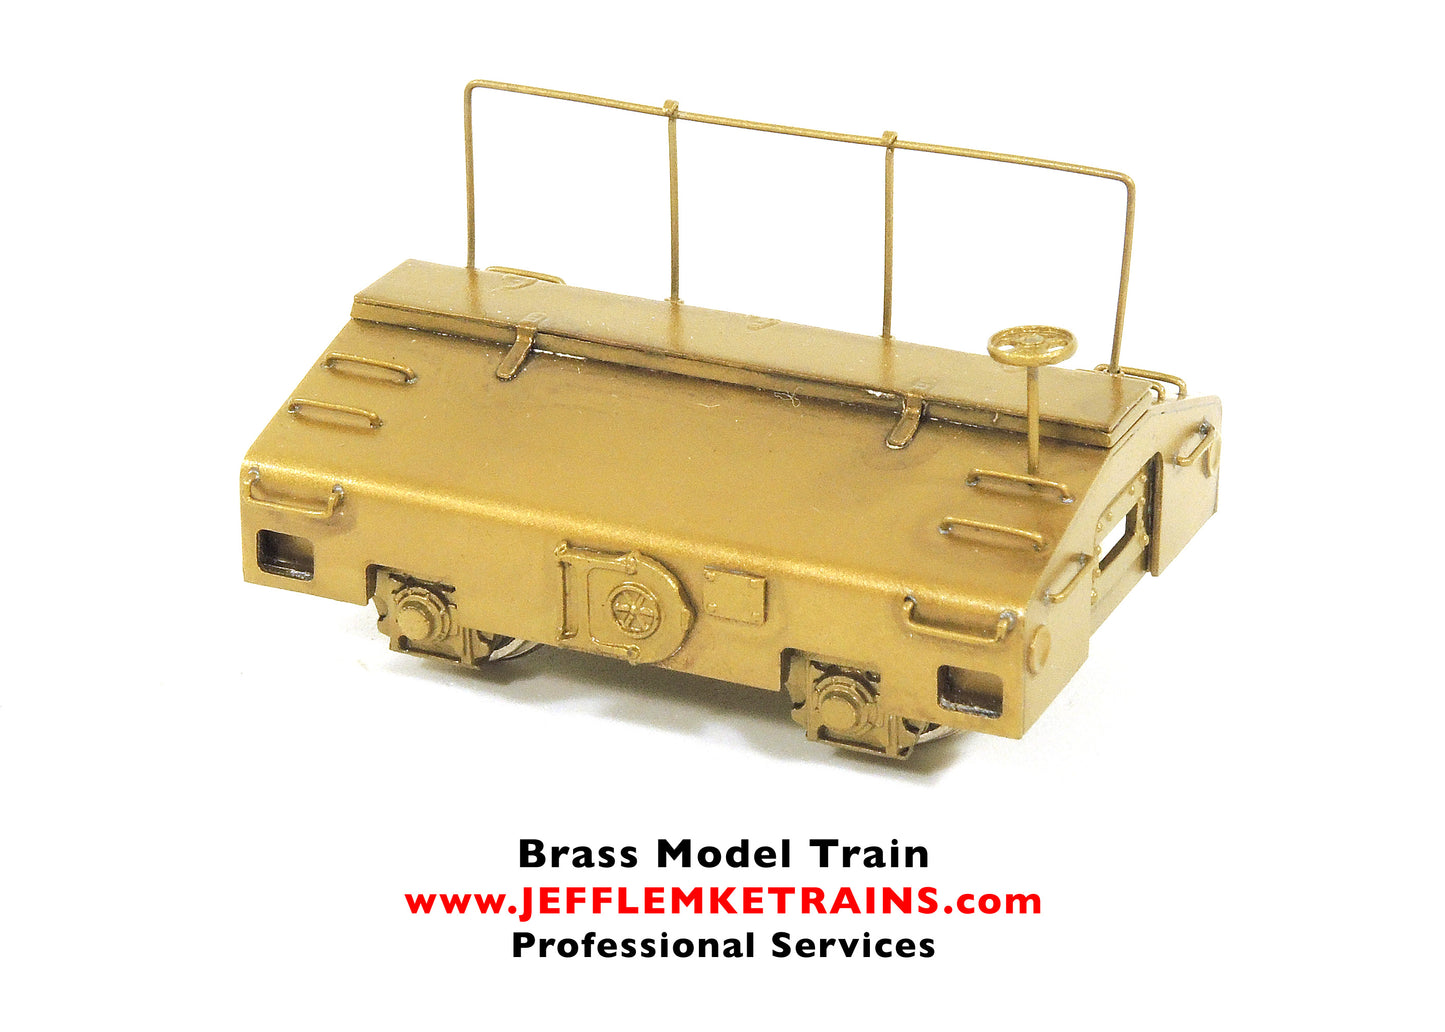 HO Scale Brass Hallmark Models Scale Test Weight Car made by Dong Jin of Korea